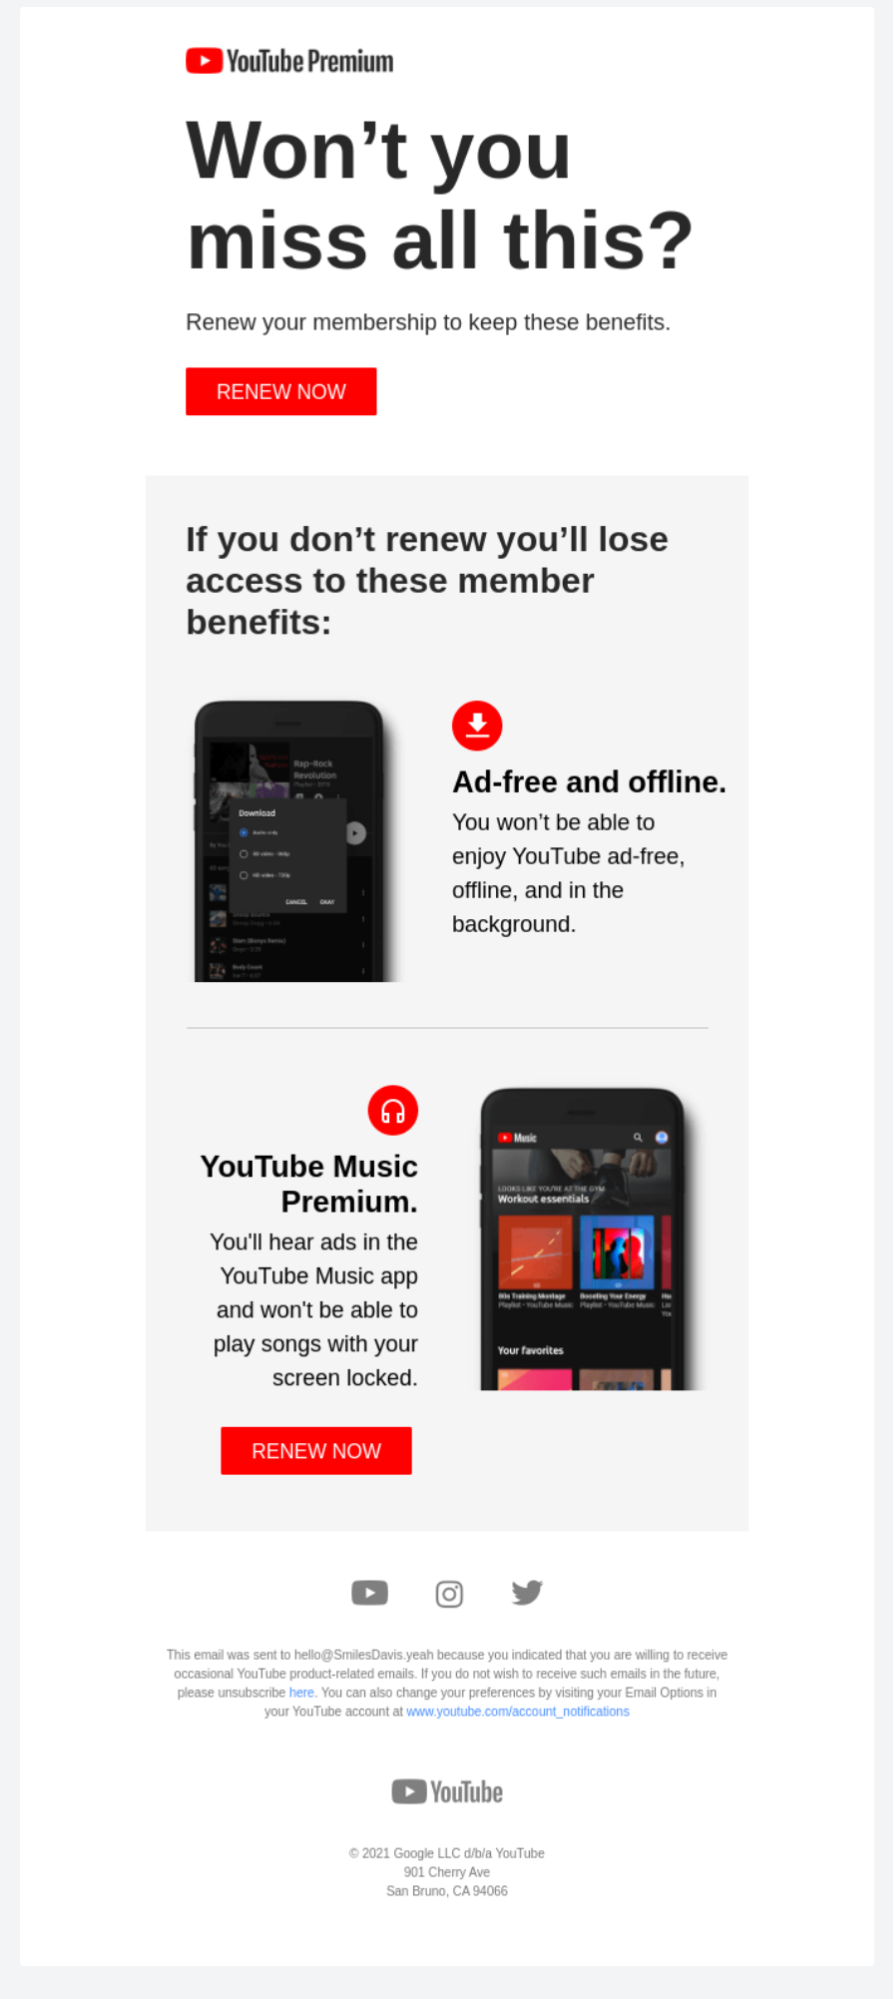 YouTube’s renewal email